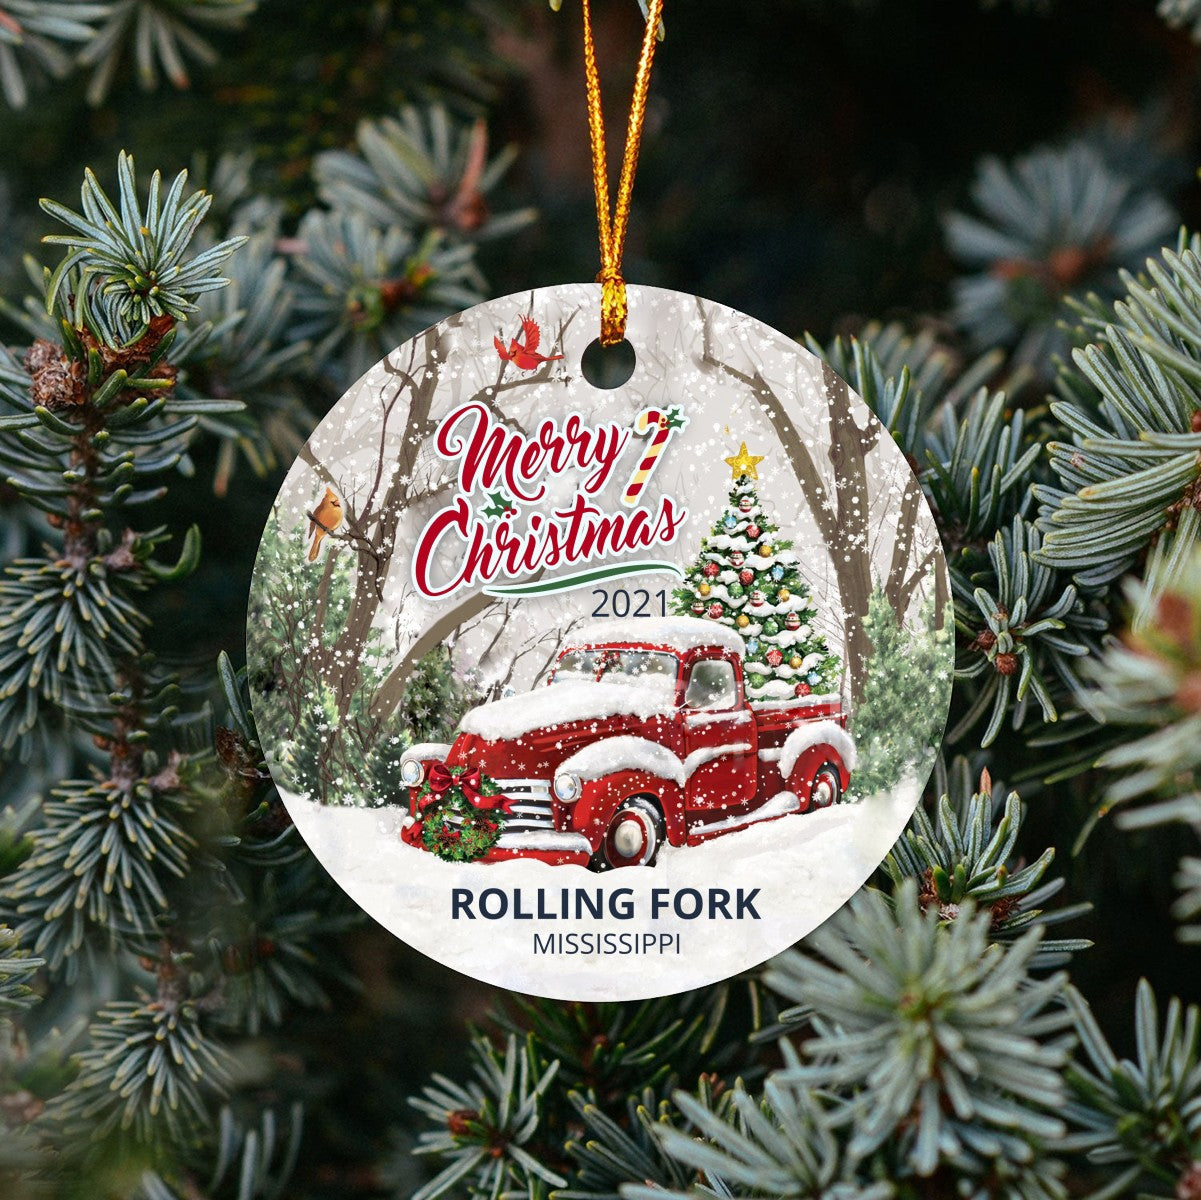 Christmas Tree Ornaments Rolling Fork - Ornament With Name City, State Rolling Fork Mississippi MS Ornament - Red Truck Xmas Ornaments 3'' Plastic Gift For Family, Friend And Housewarming